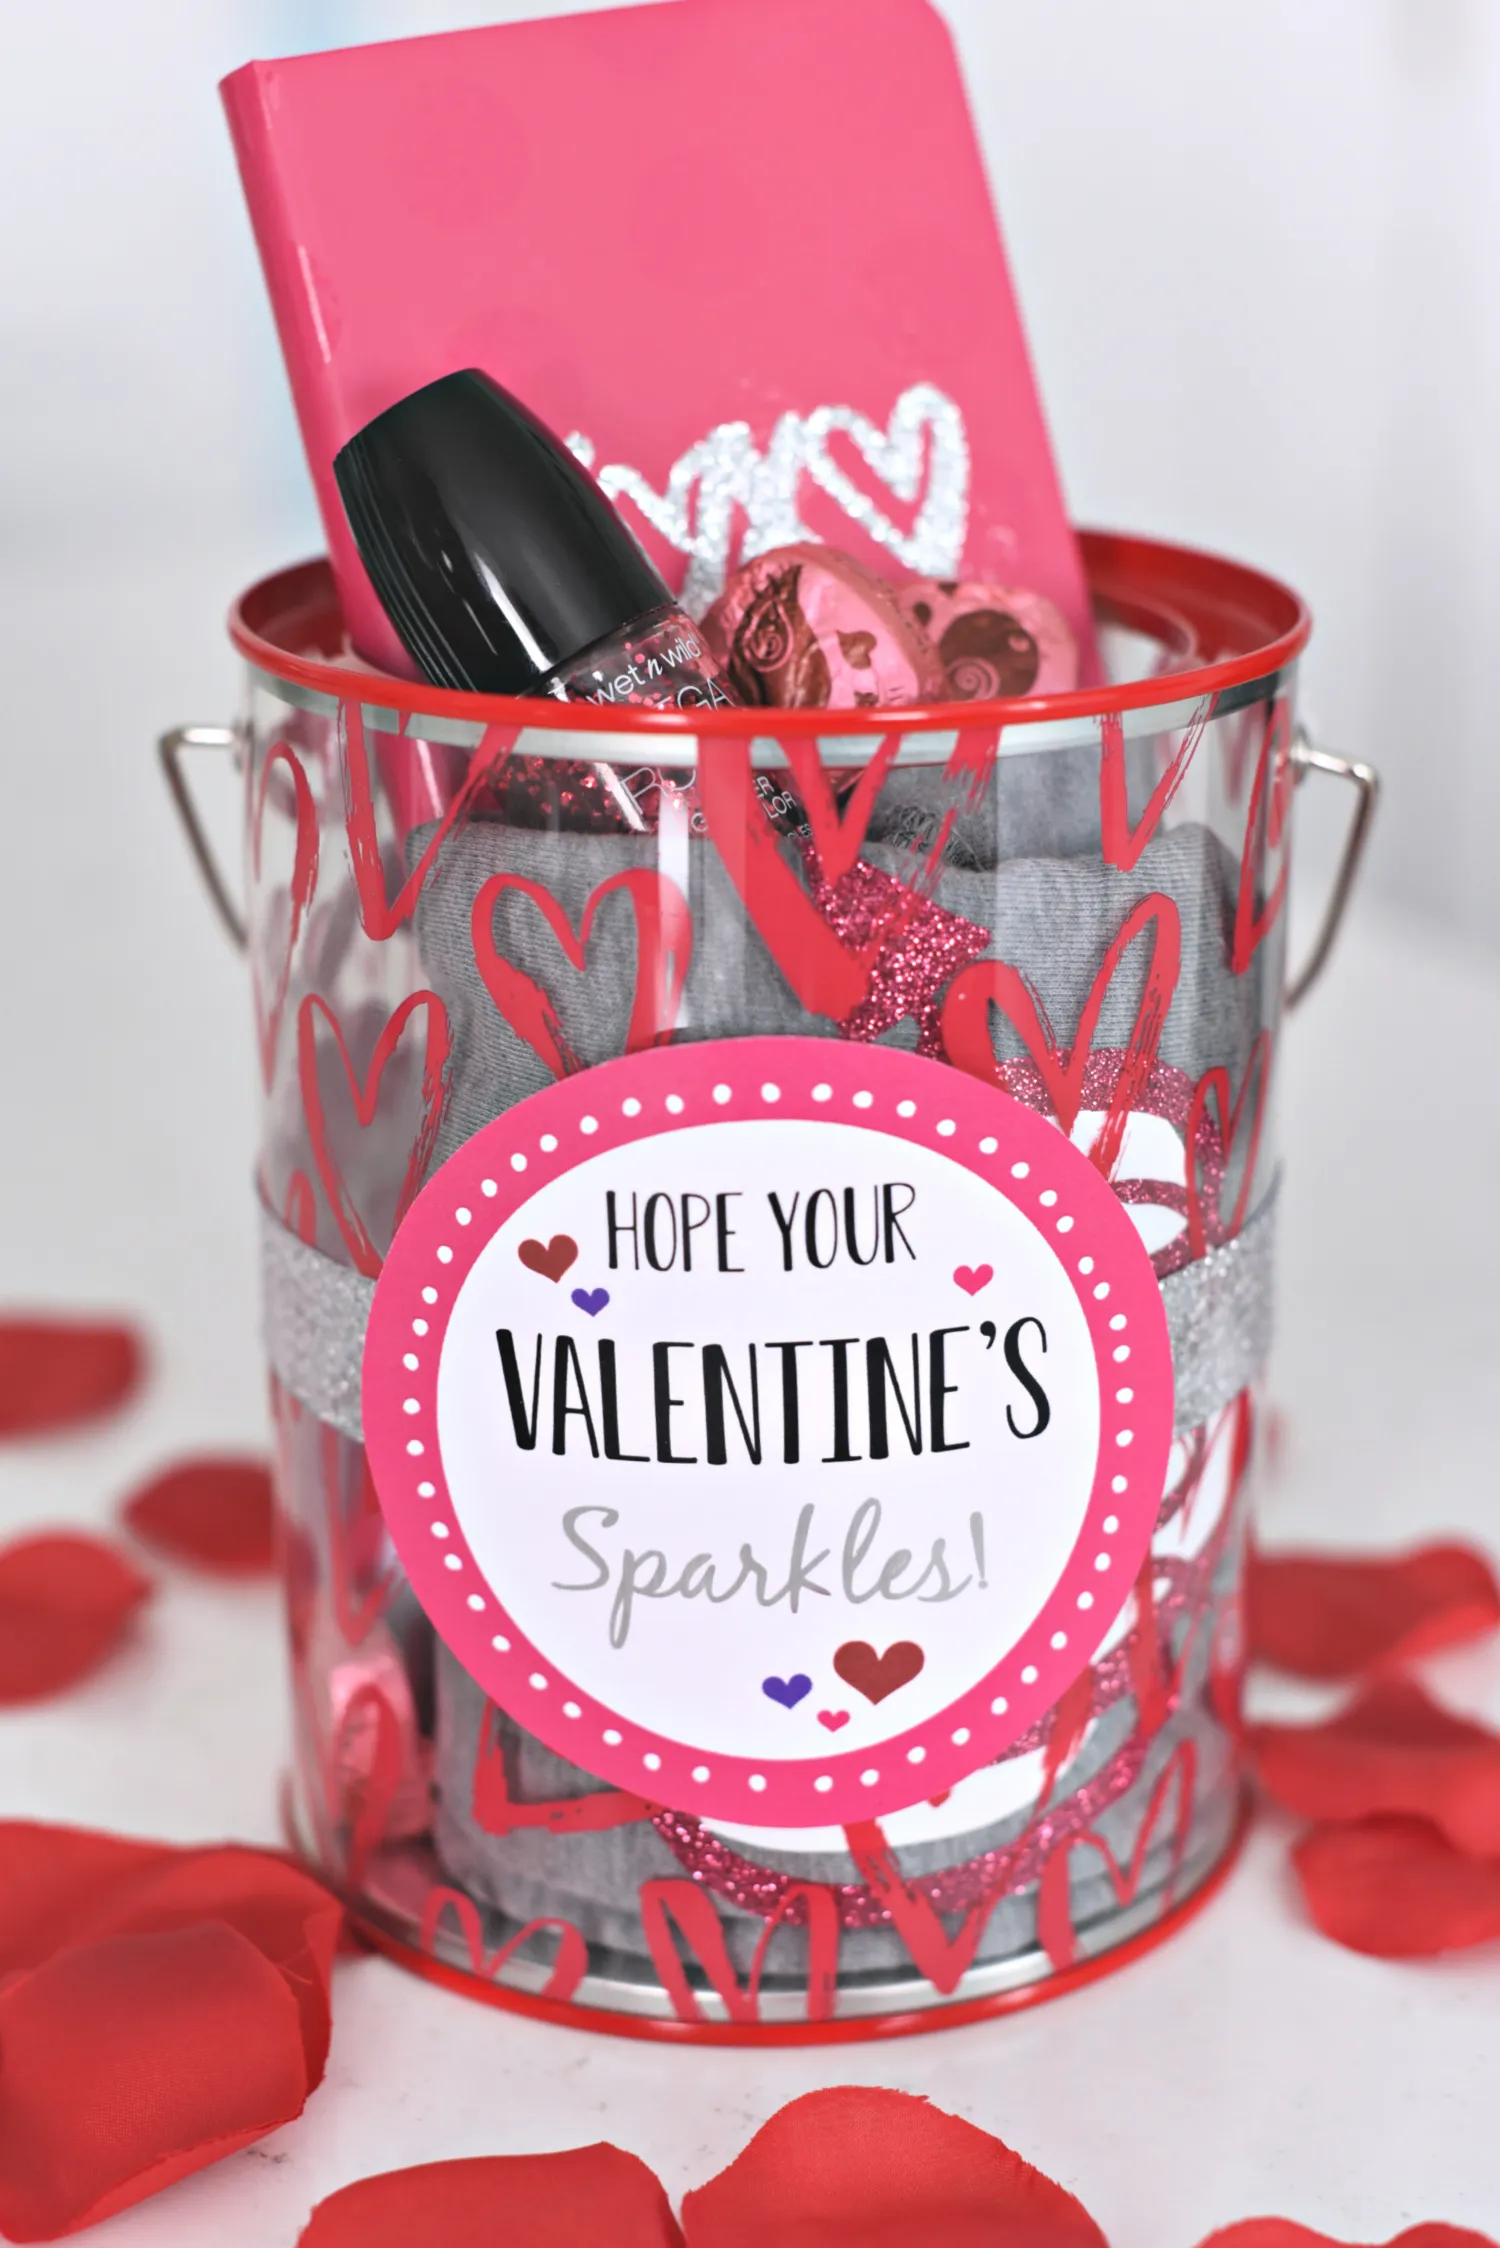 Fun Sparkle Themed Valentines Day Gift: